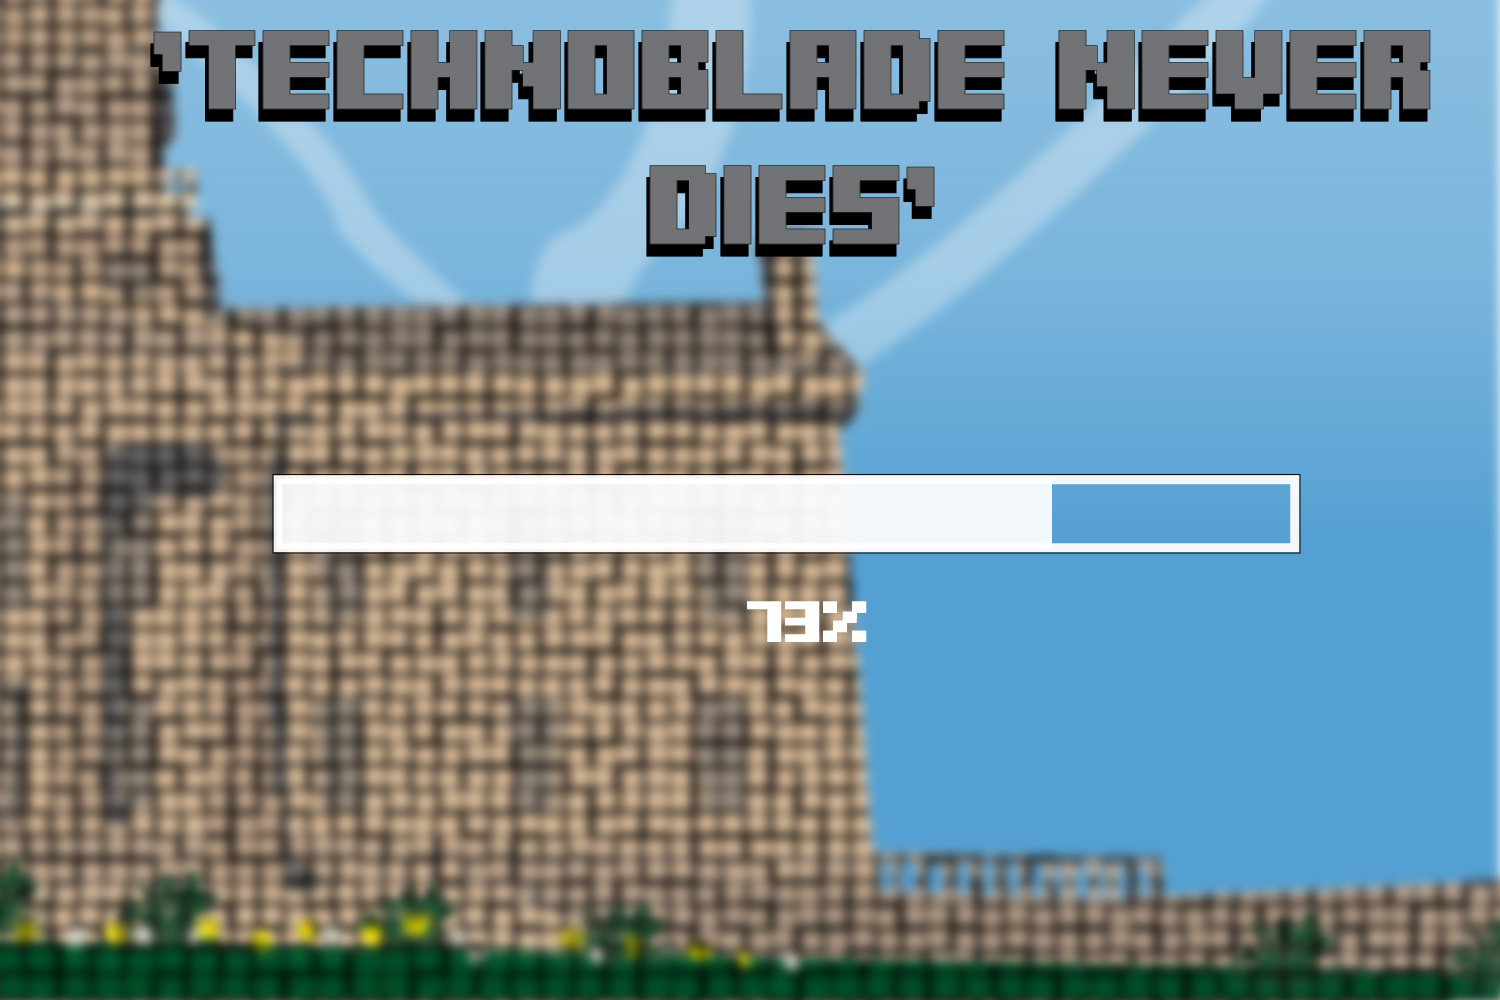 Who was Technoblade and how did he die?